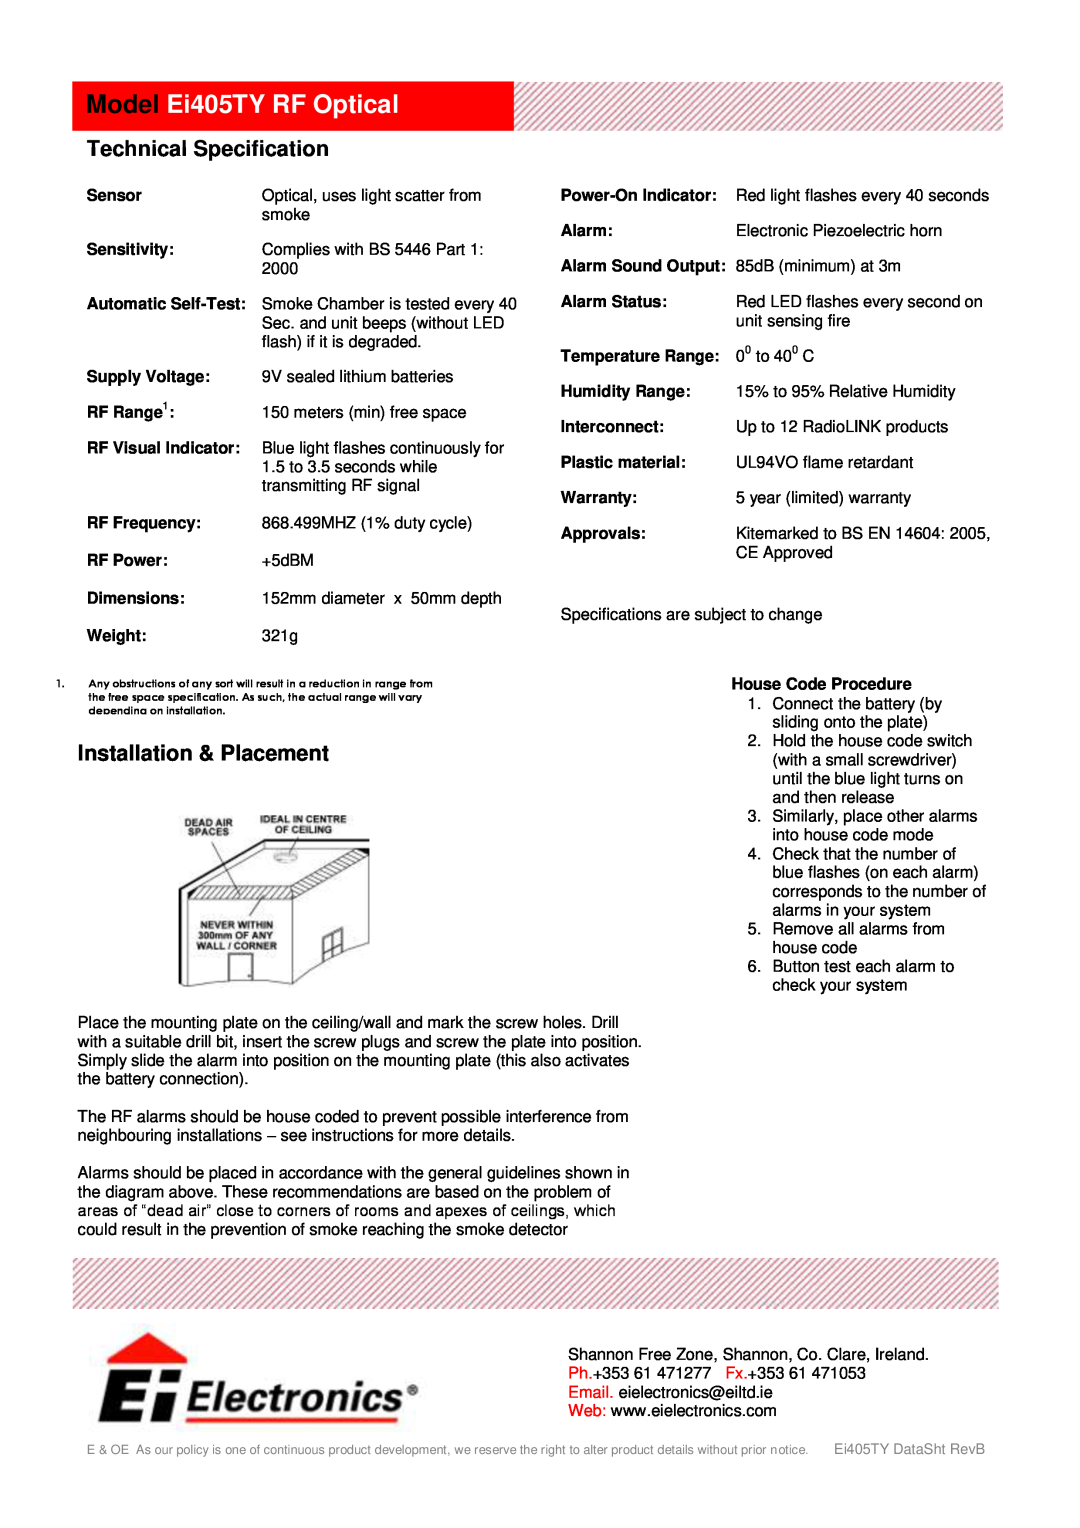 Ei Electronics manual Technical Specification, Installation & Placement, Model Ei405TY RF Optical 